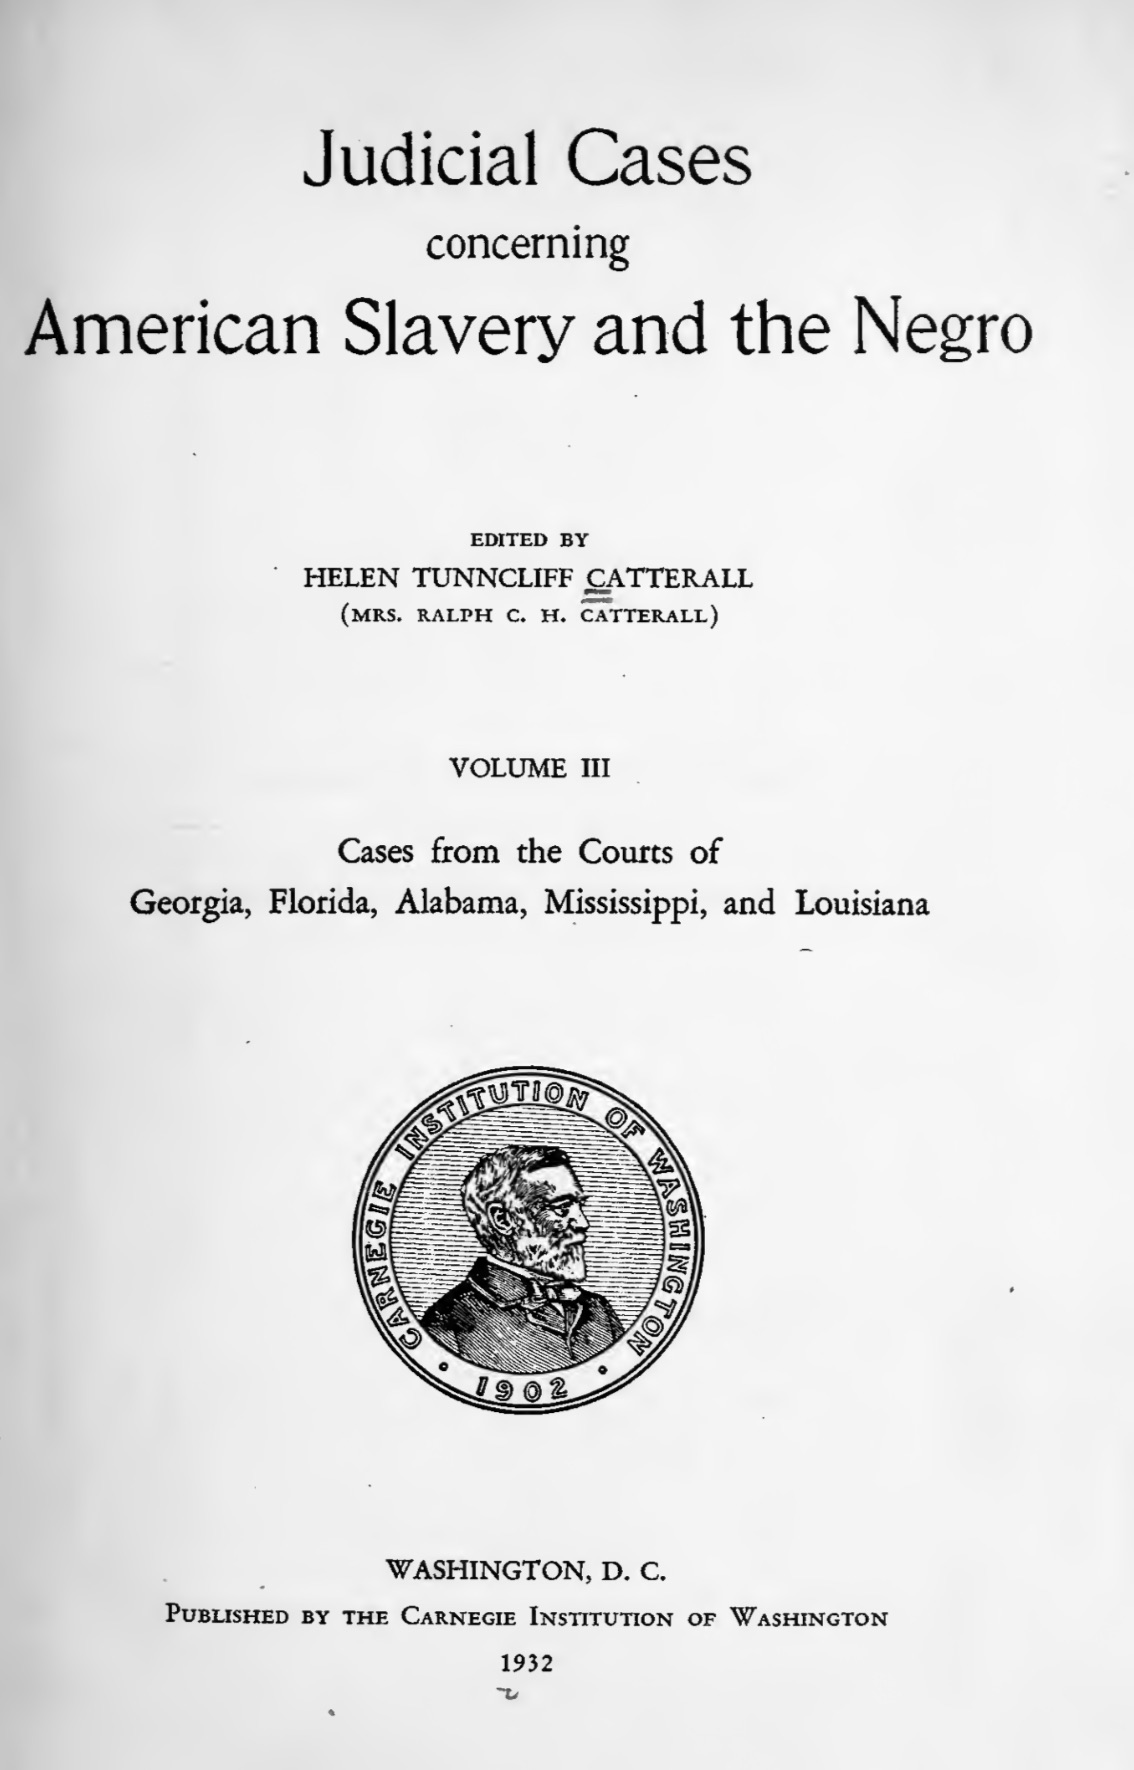 Judicial cases concerning American slavery and the Negro - Volume III Cover